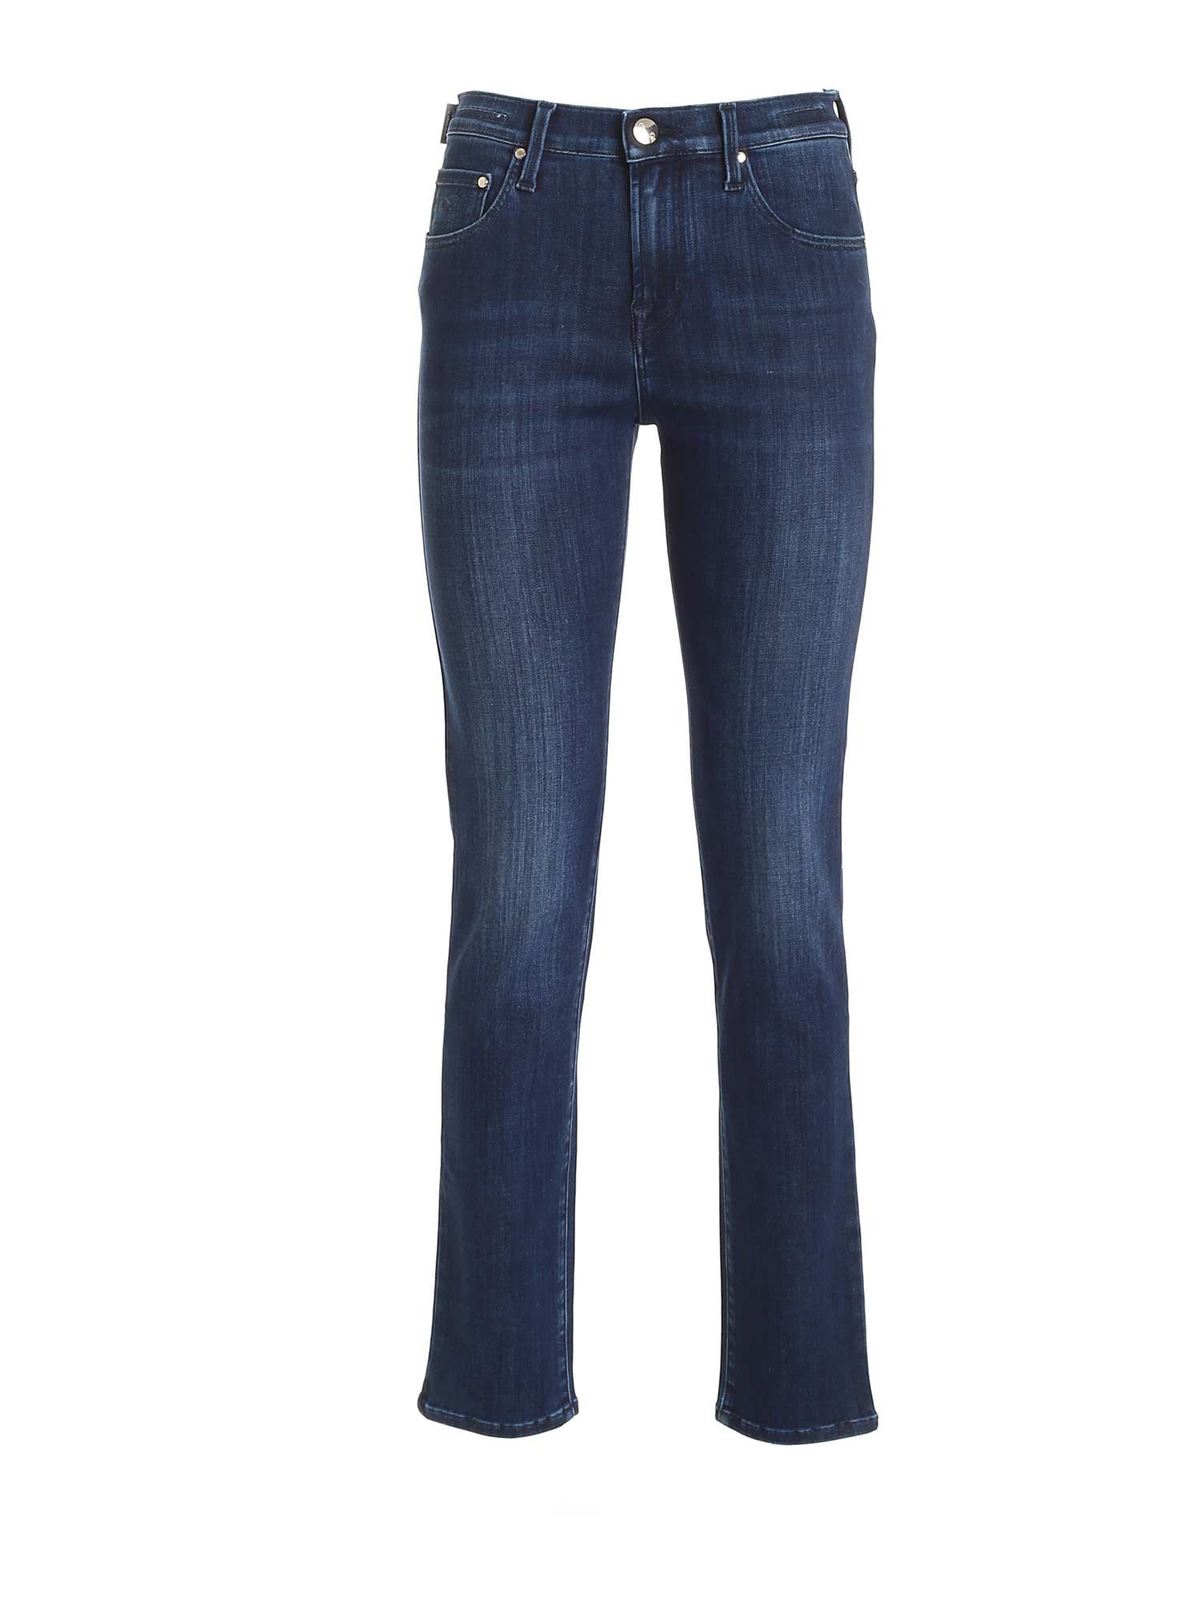 Jacob Cohen LOGO FADED JEANS IN BLUE